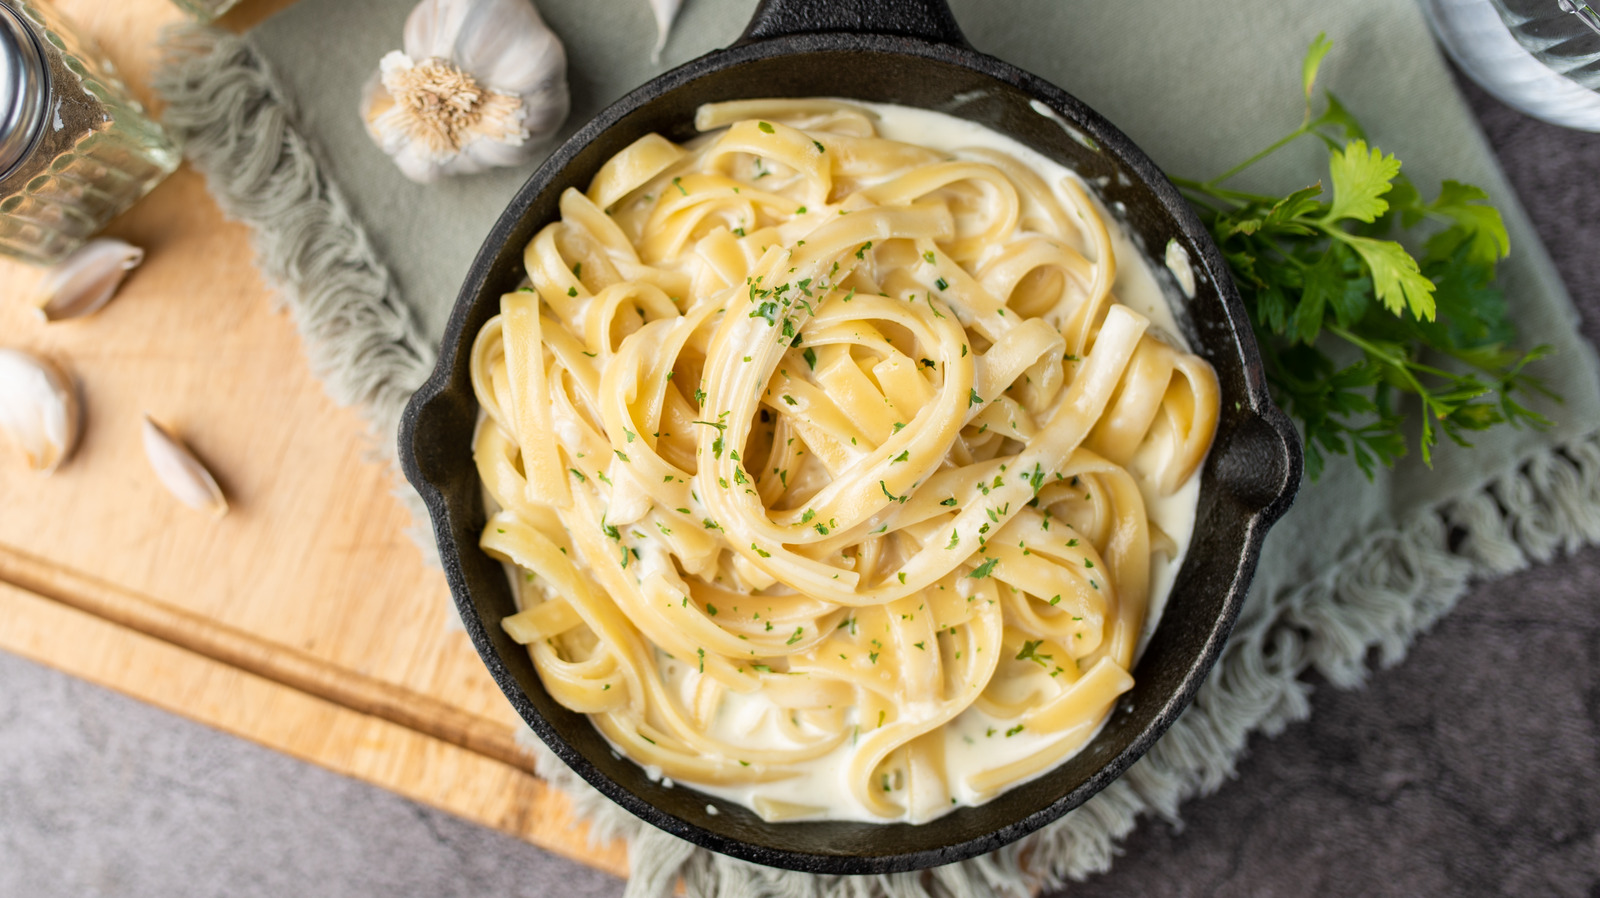 The Simple Fix For Gloopy Jarred Alfredo Sauce